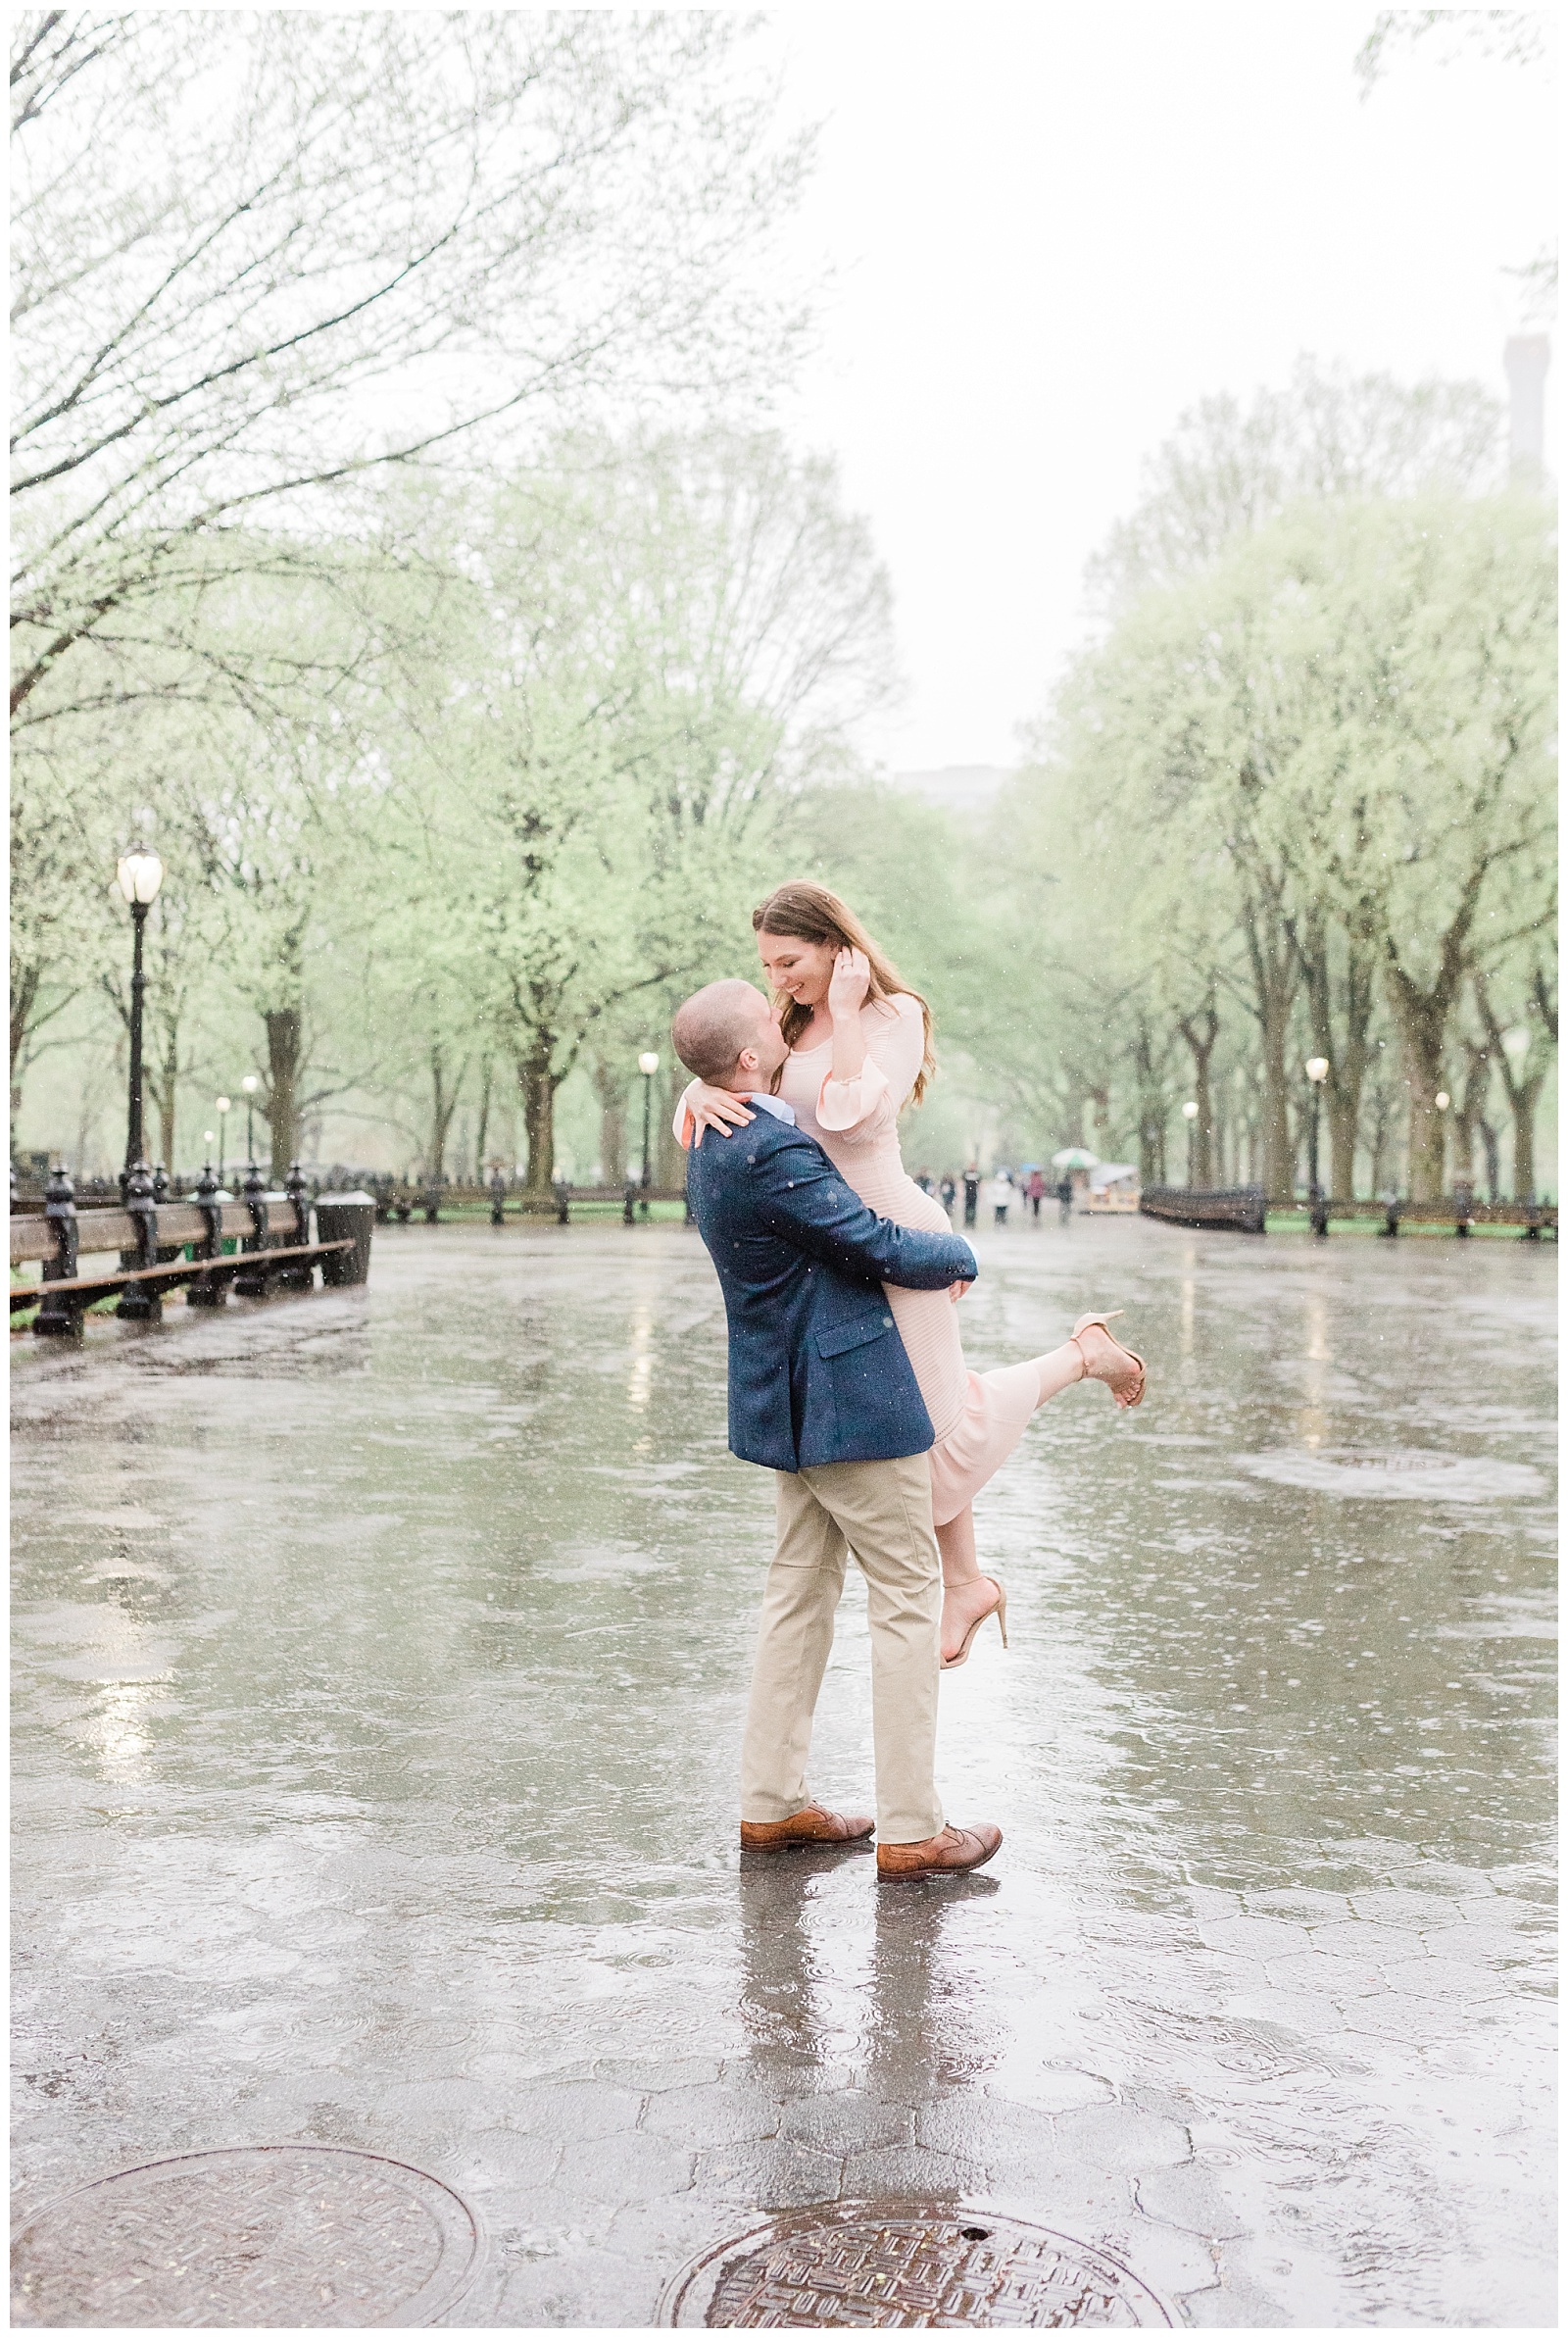 A man lifts his fiance in the rain in the Central Park Mall.